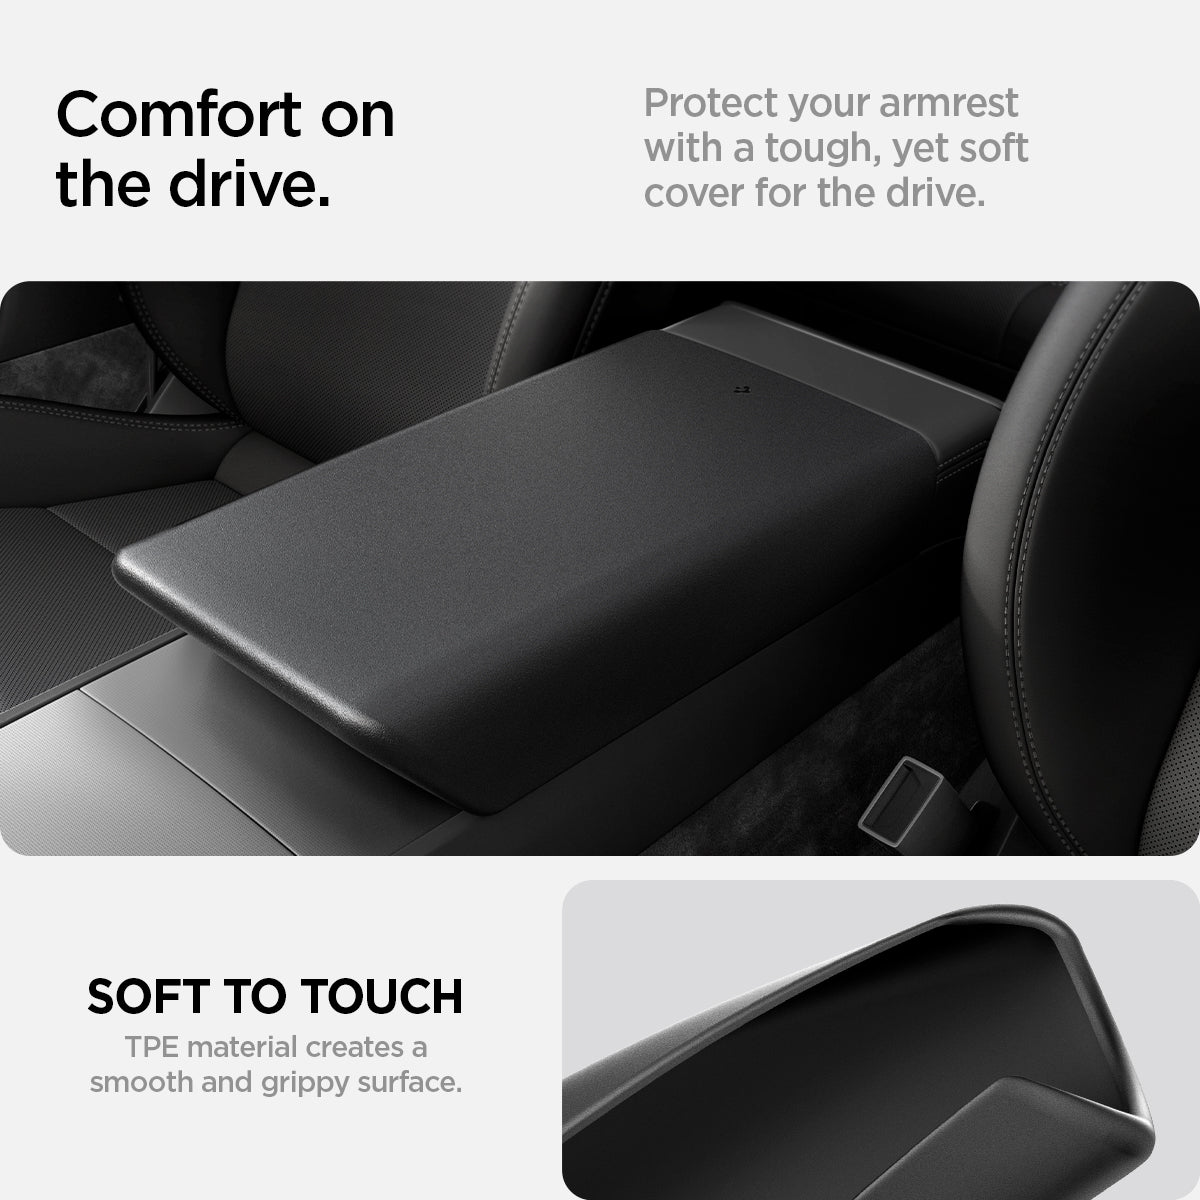 ACP07410 - Model 3 (2024) Armrest Cover TO240H in Black showing the comfort on the drive, protect your armrest with a tough, yet soft cover for the drive, soft to touch (TPE material creates a smooth grippy surface)